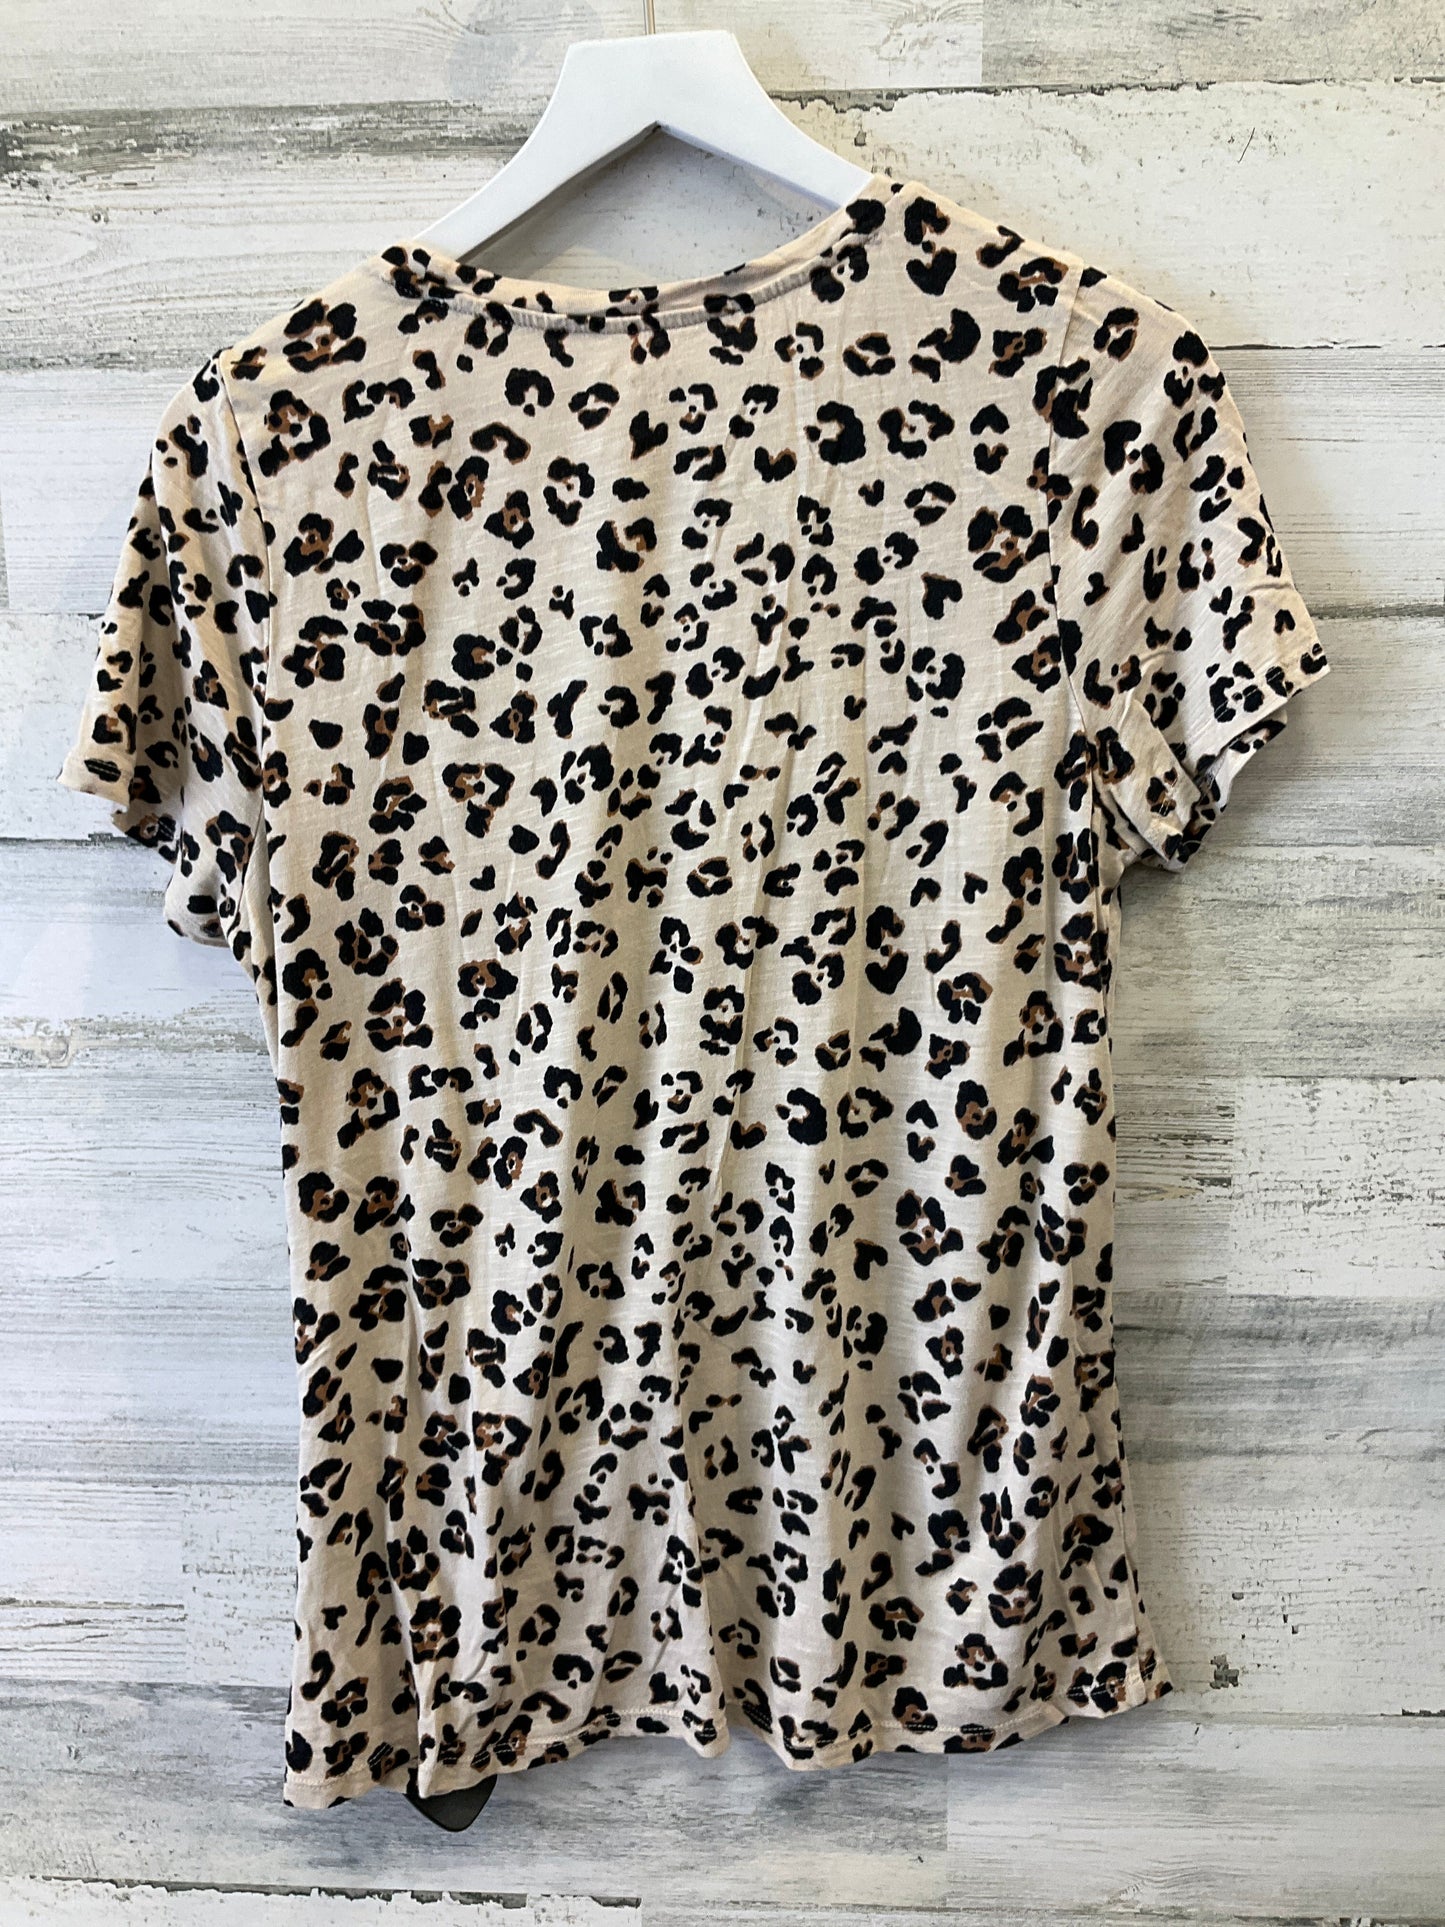 Camouflage Print Top Short Sleeve Maurices, Size Xl